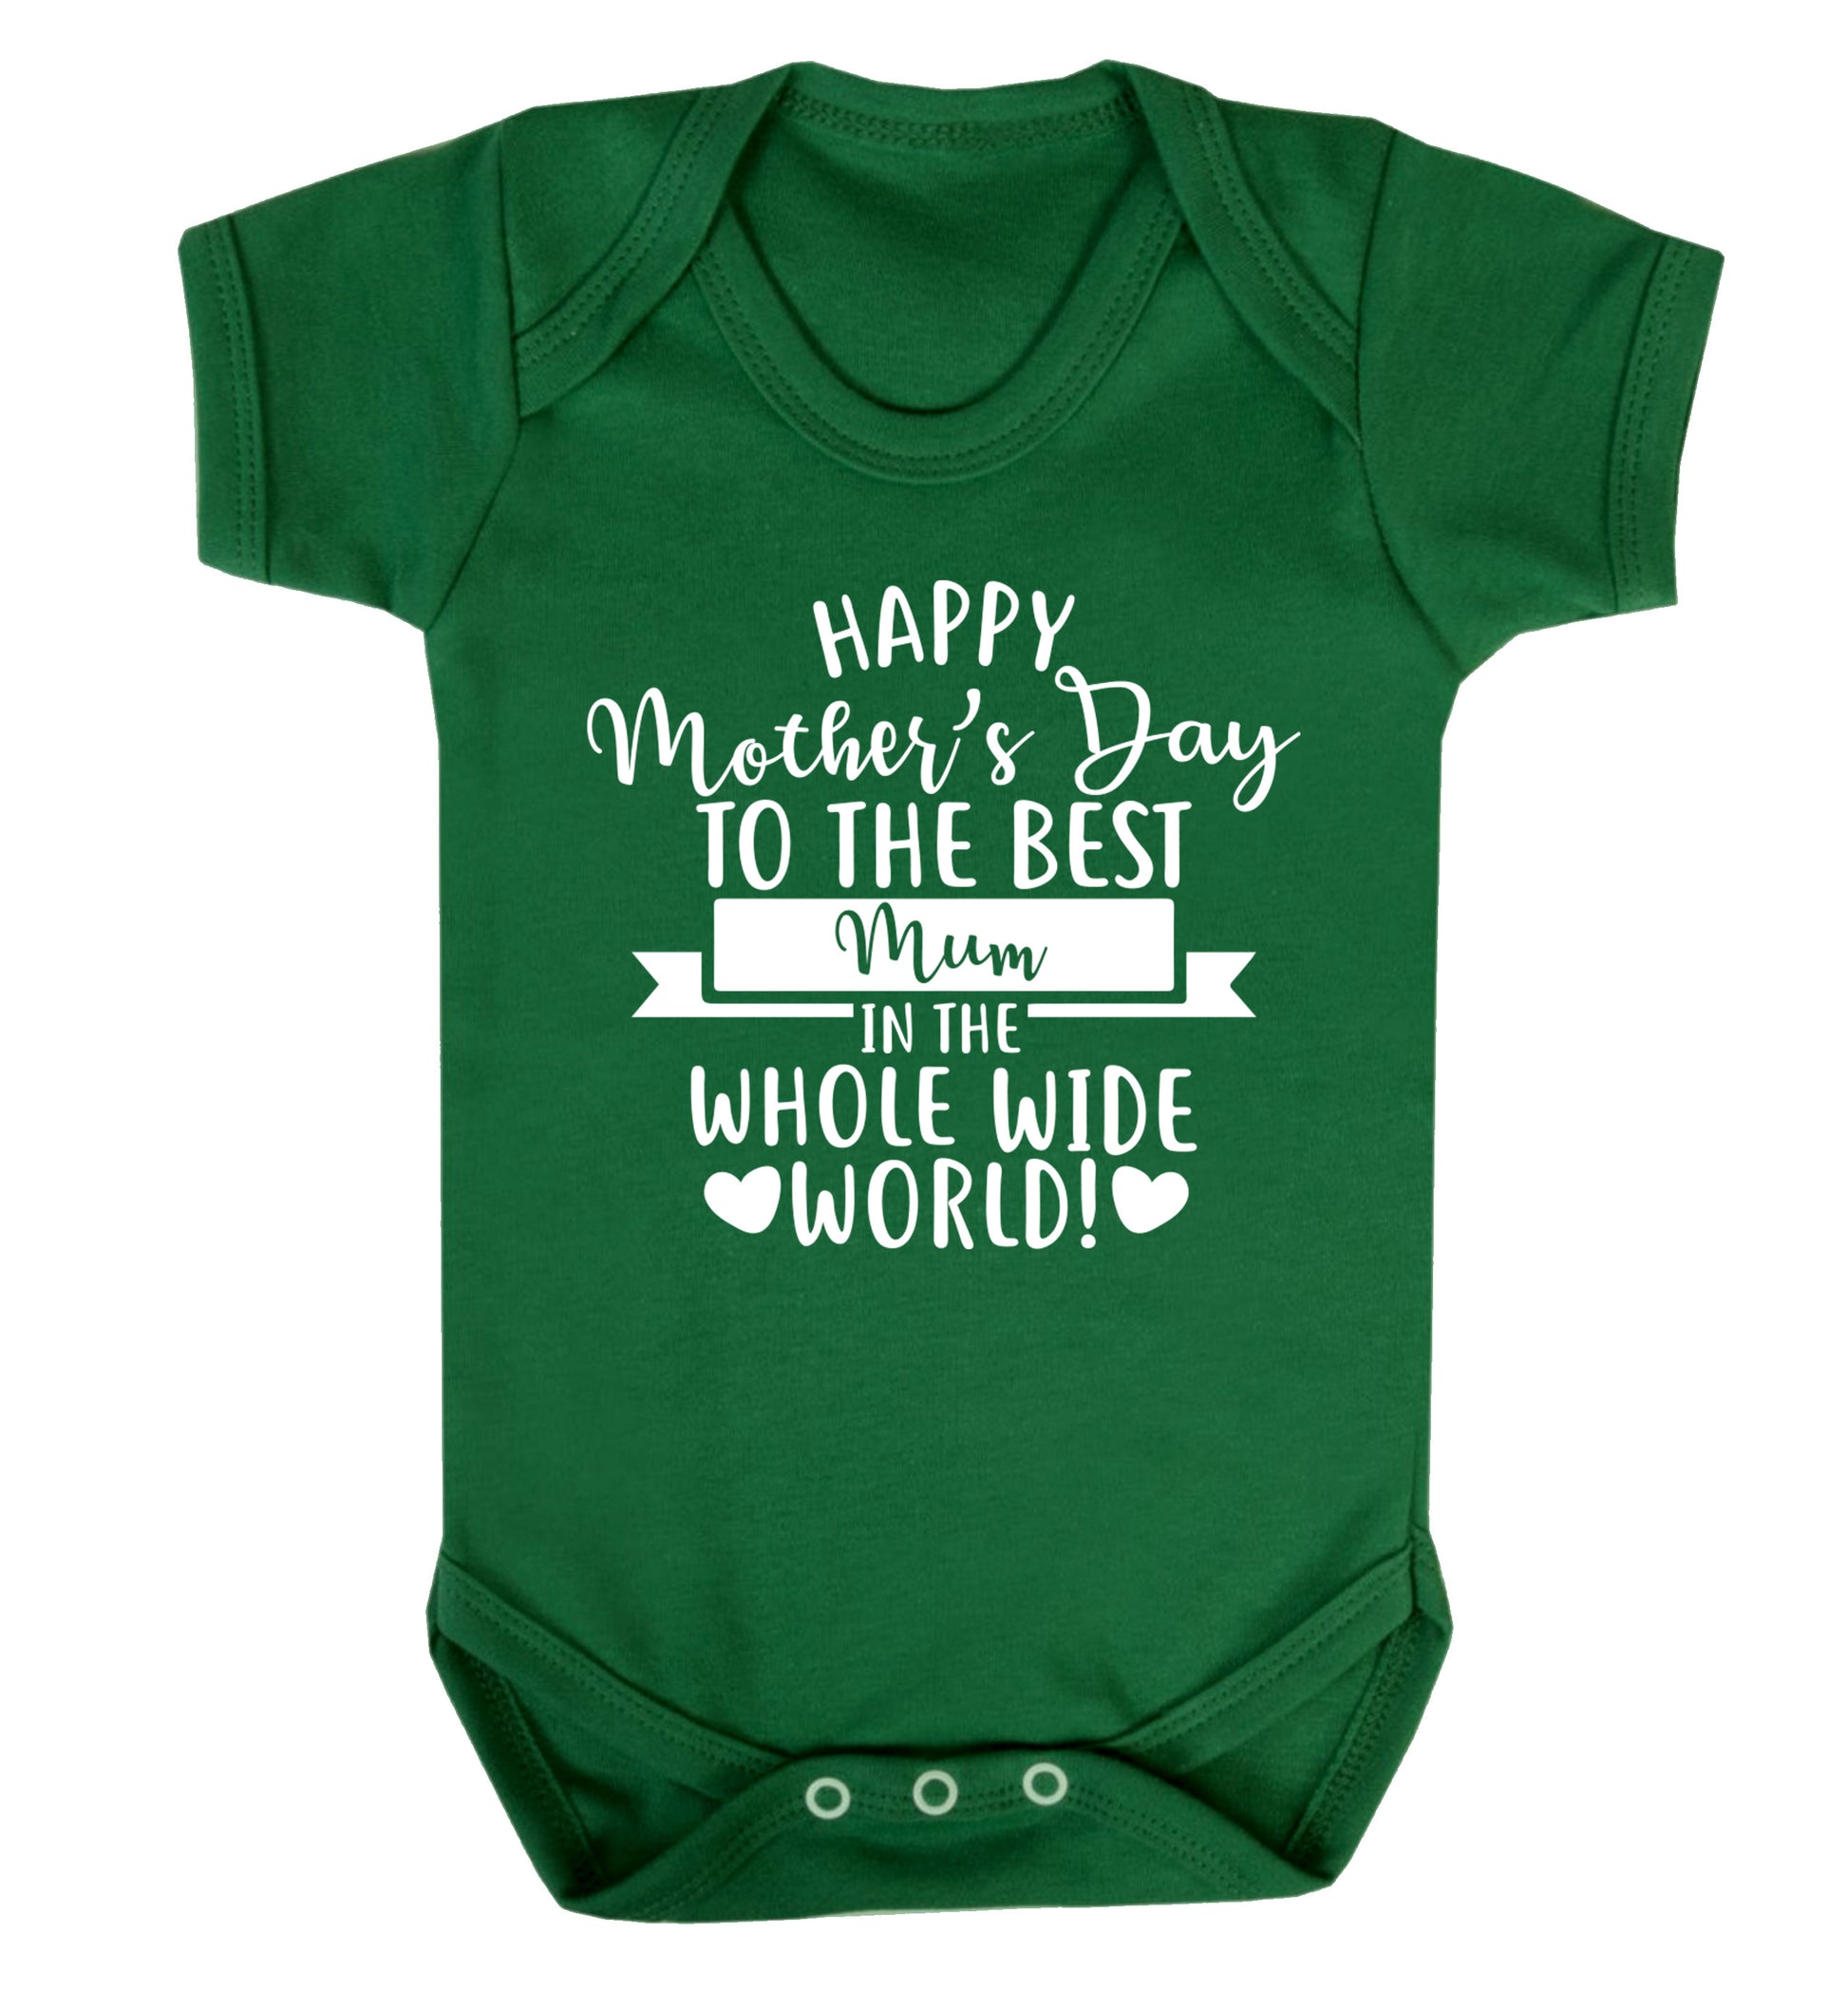 Happy Mother's Day to the best mum in the whole wide world! Baby Vest green 18-24 months